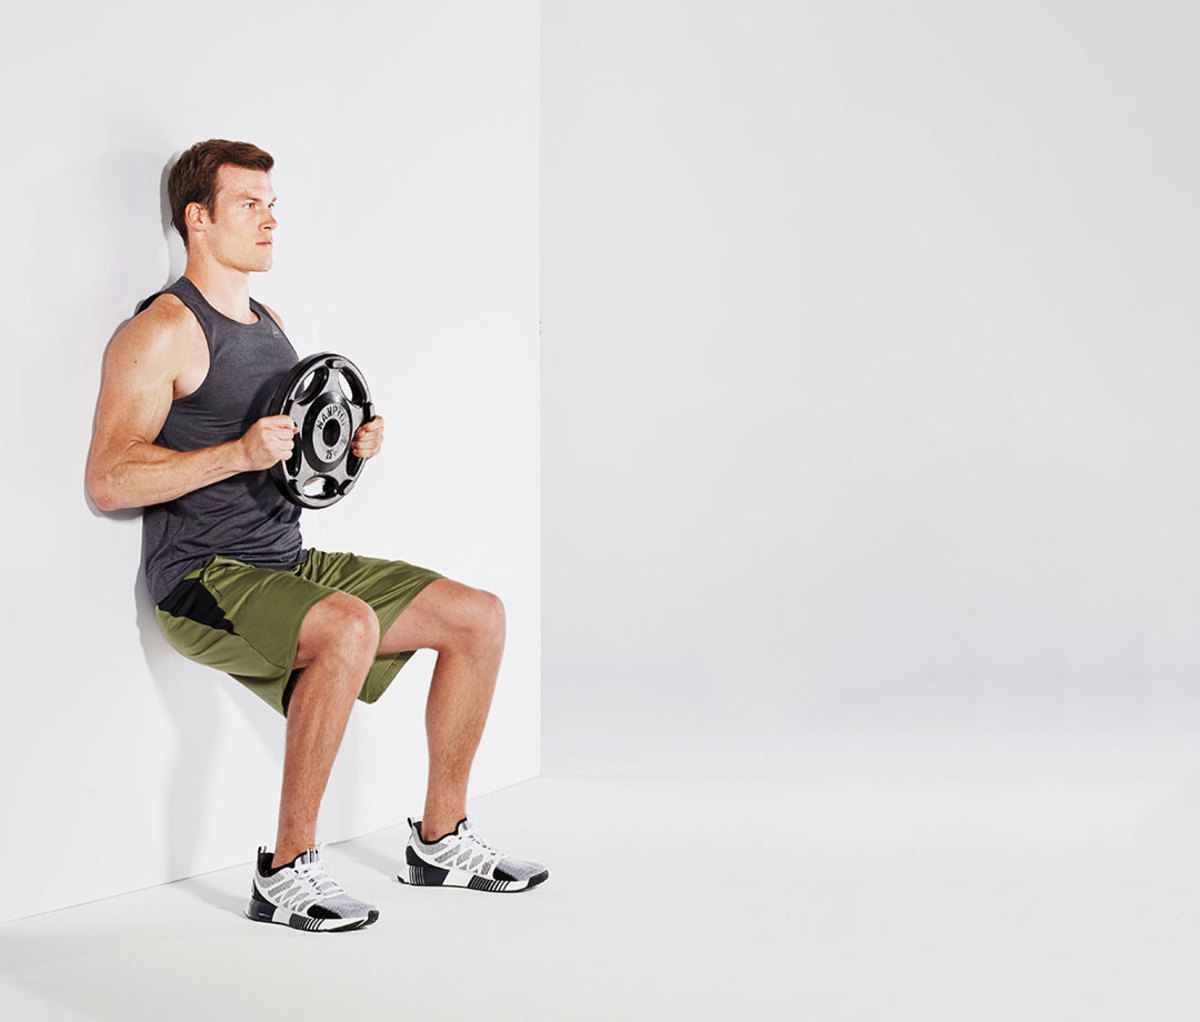 Weighted wall sit